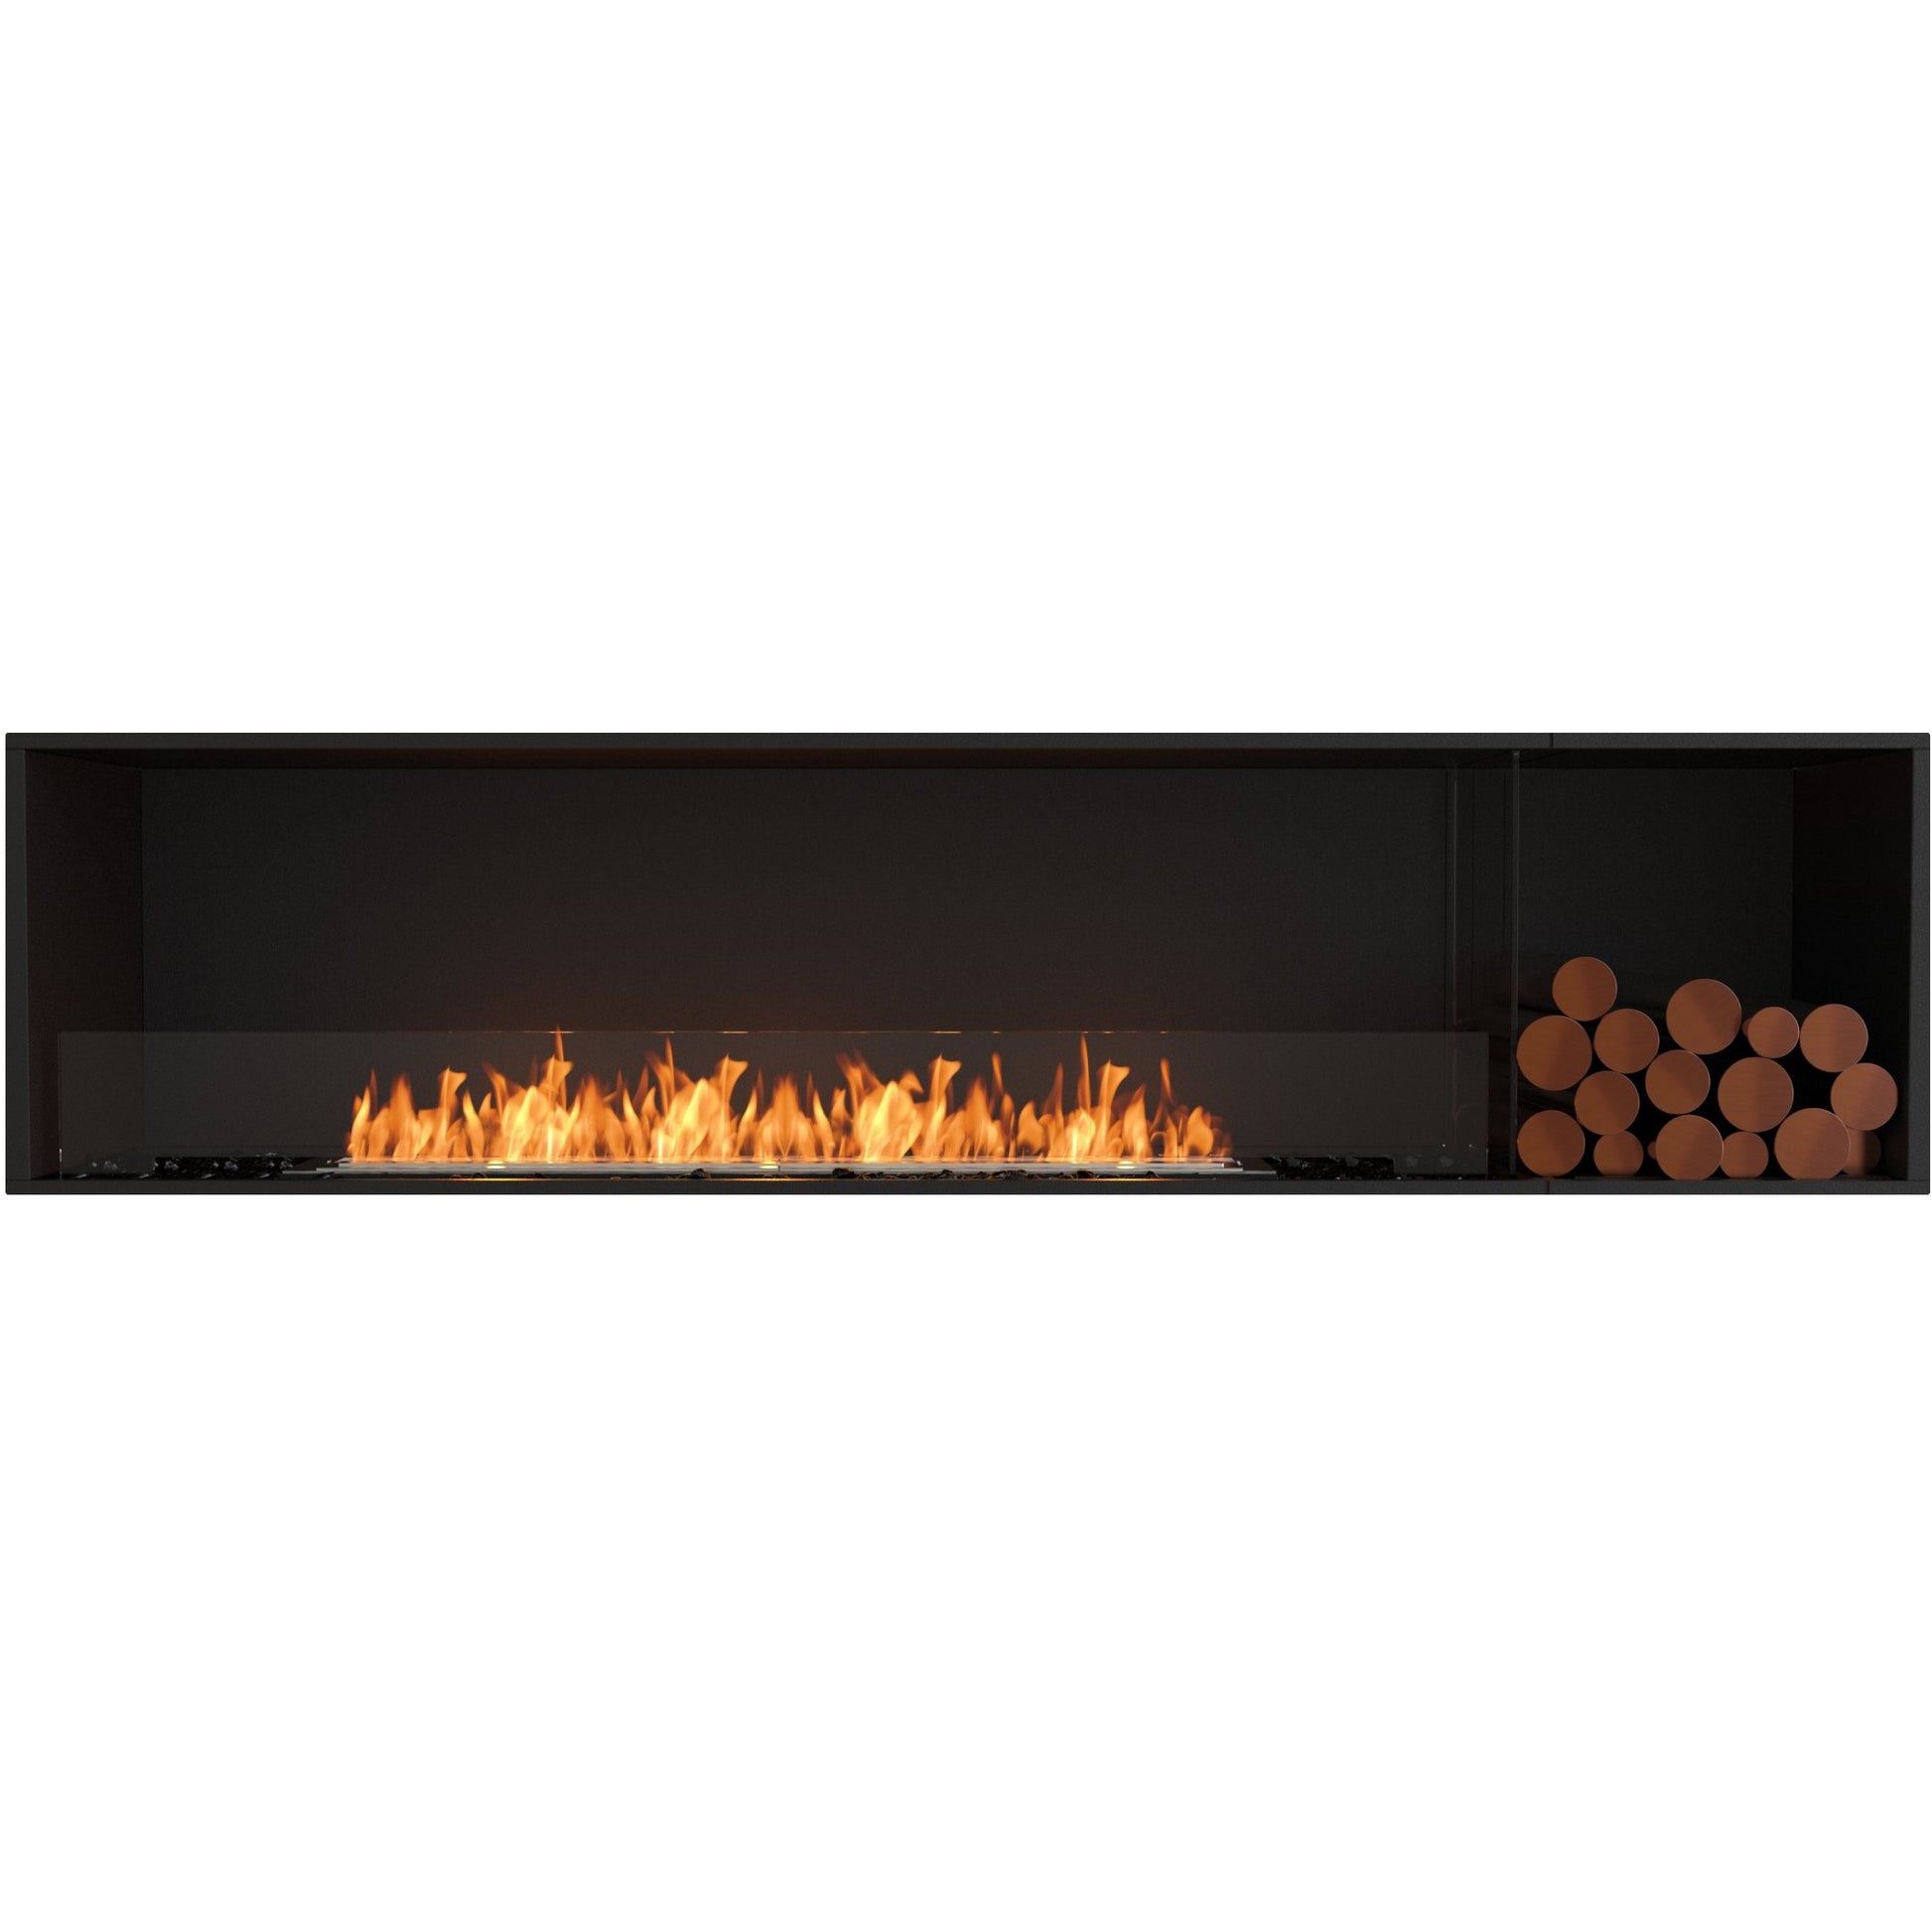 Flex 86ss BXR; Best quality bio ethanol wall fireplace in black with decorative box right by for sale by EcoSmart Fire